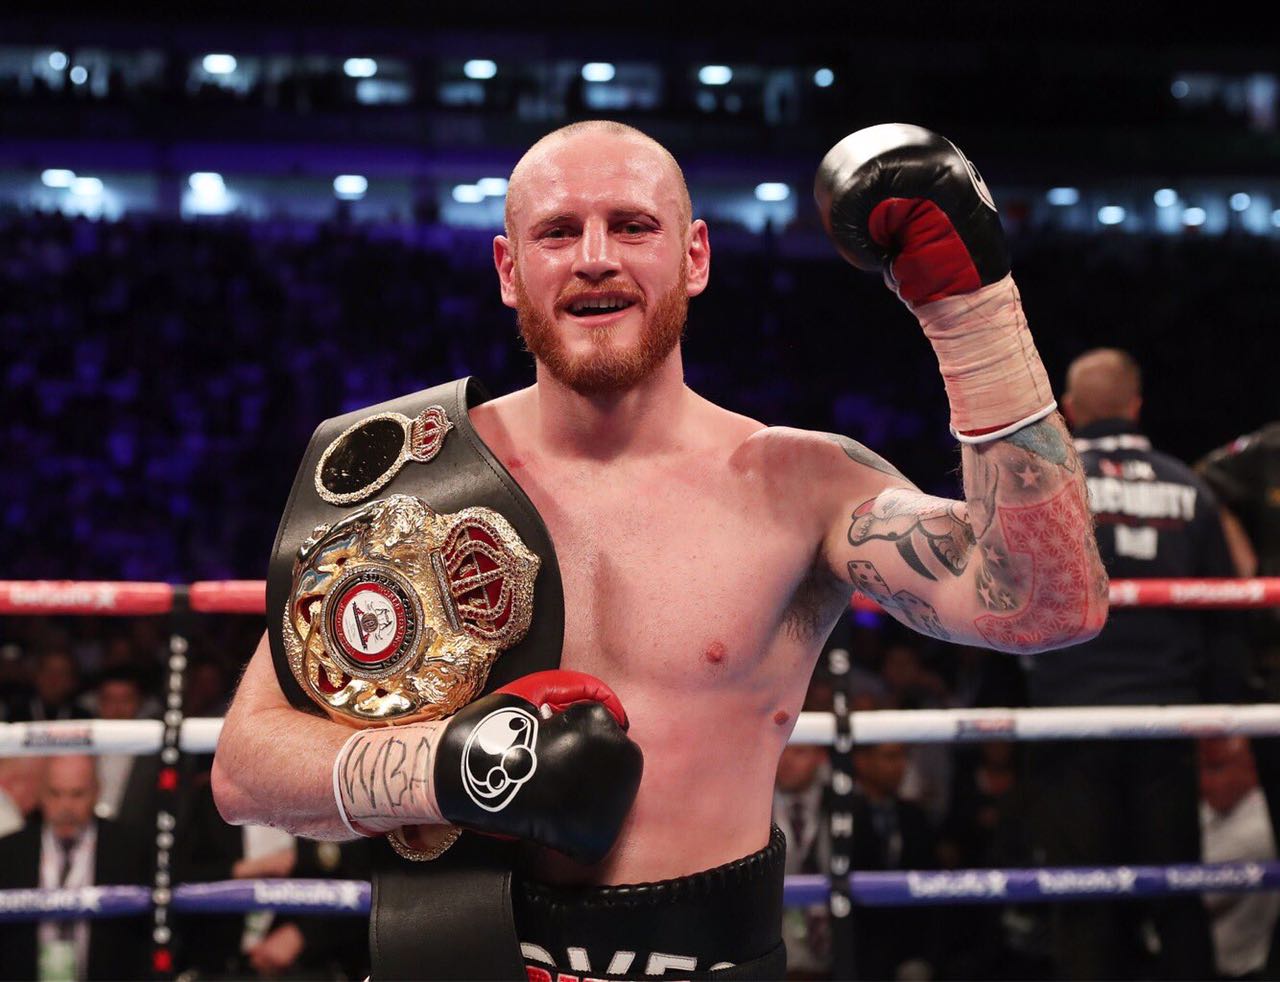 Groves is the new WBA Super Middleweight Super Champion